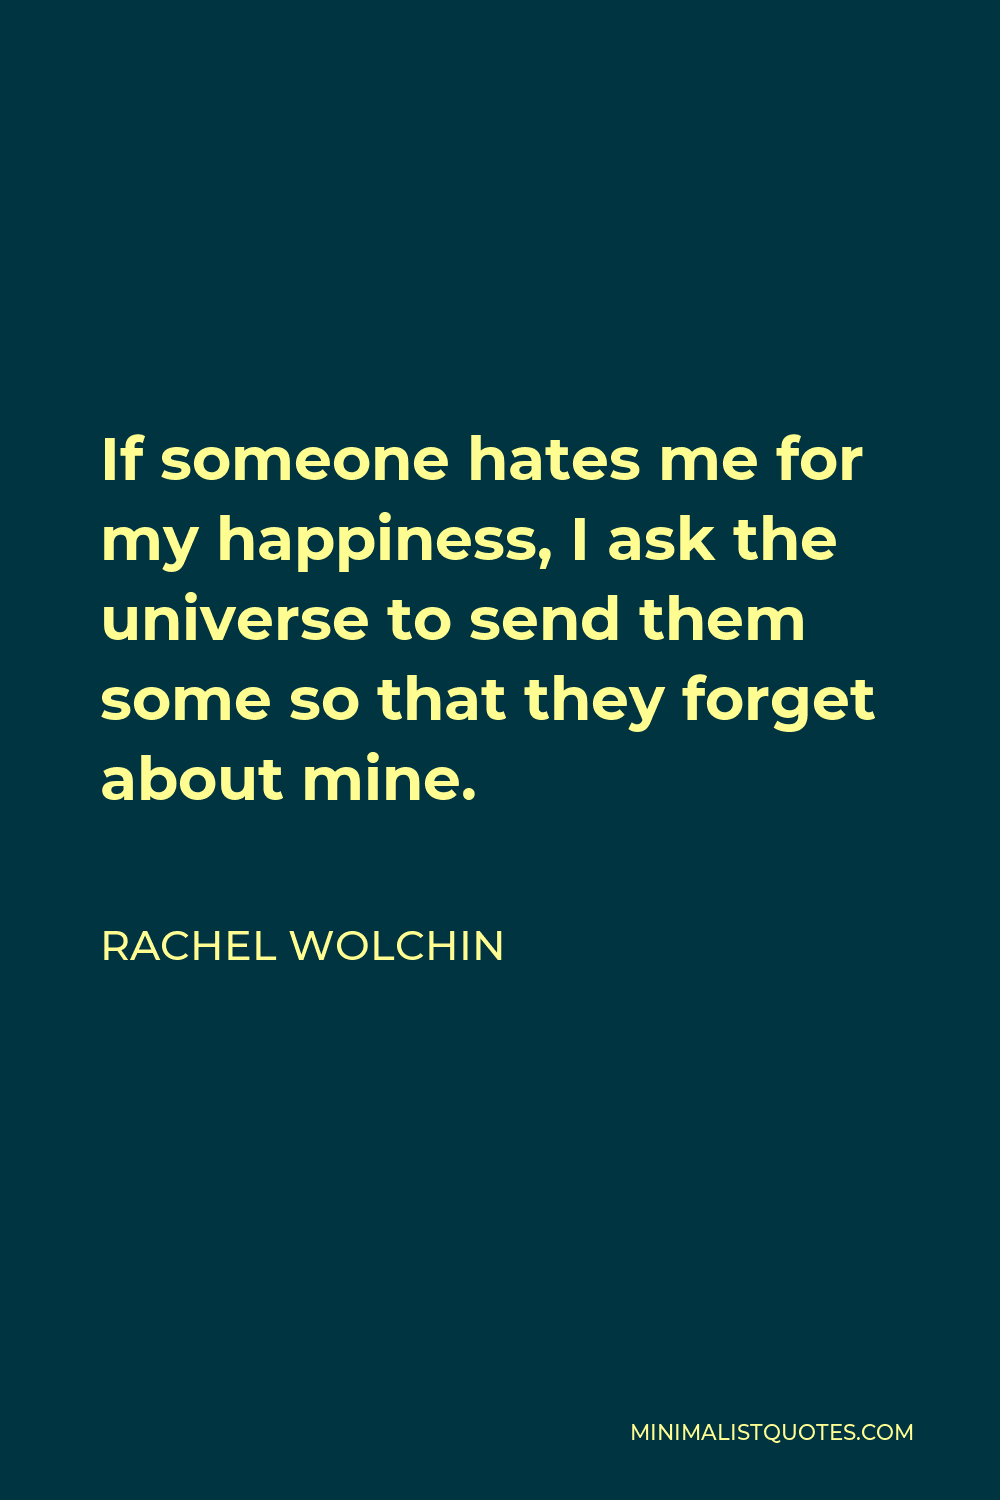 Rachel Wolchin Quote - If someone hates me for my happiness, I ask the universe to send them some so that they forget about mine.